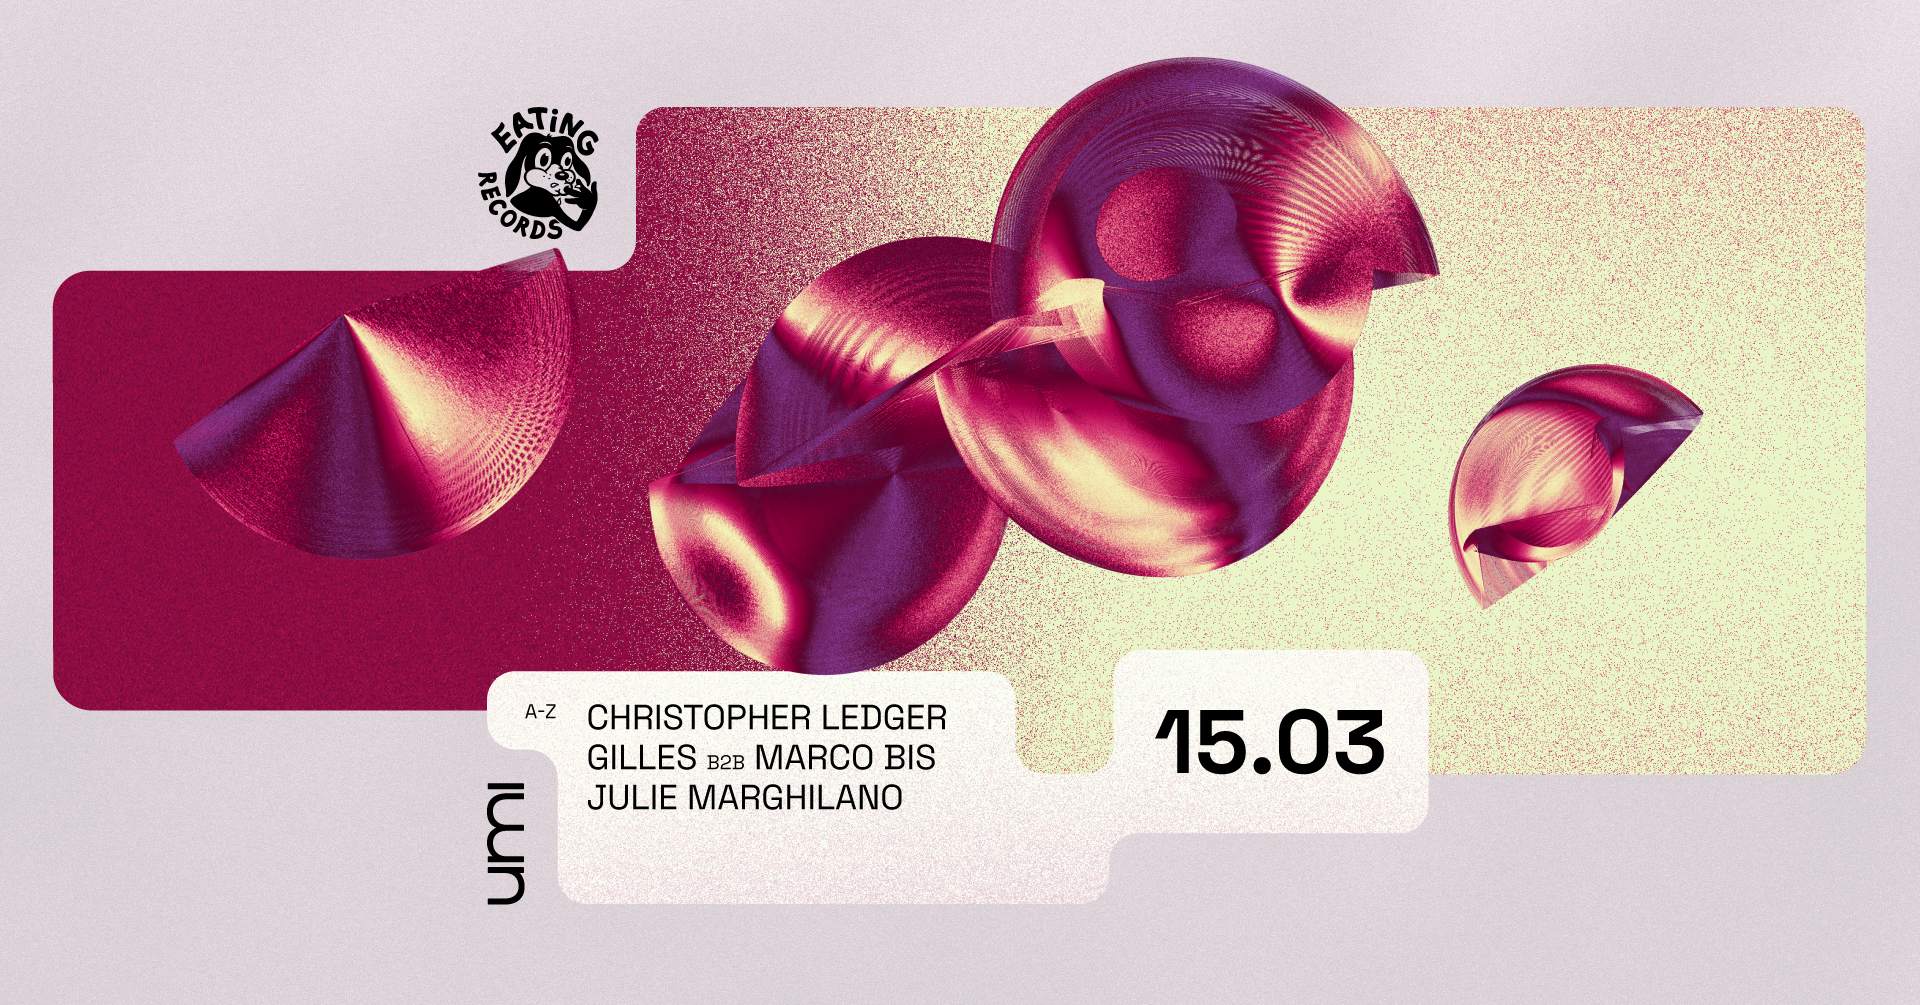 UMI x Eating Records with Christopher Ledger, Gilles B2B Marco Bis, Julie Marghilano - フライヤー表